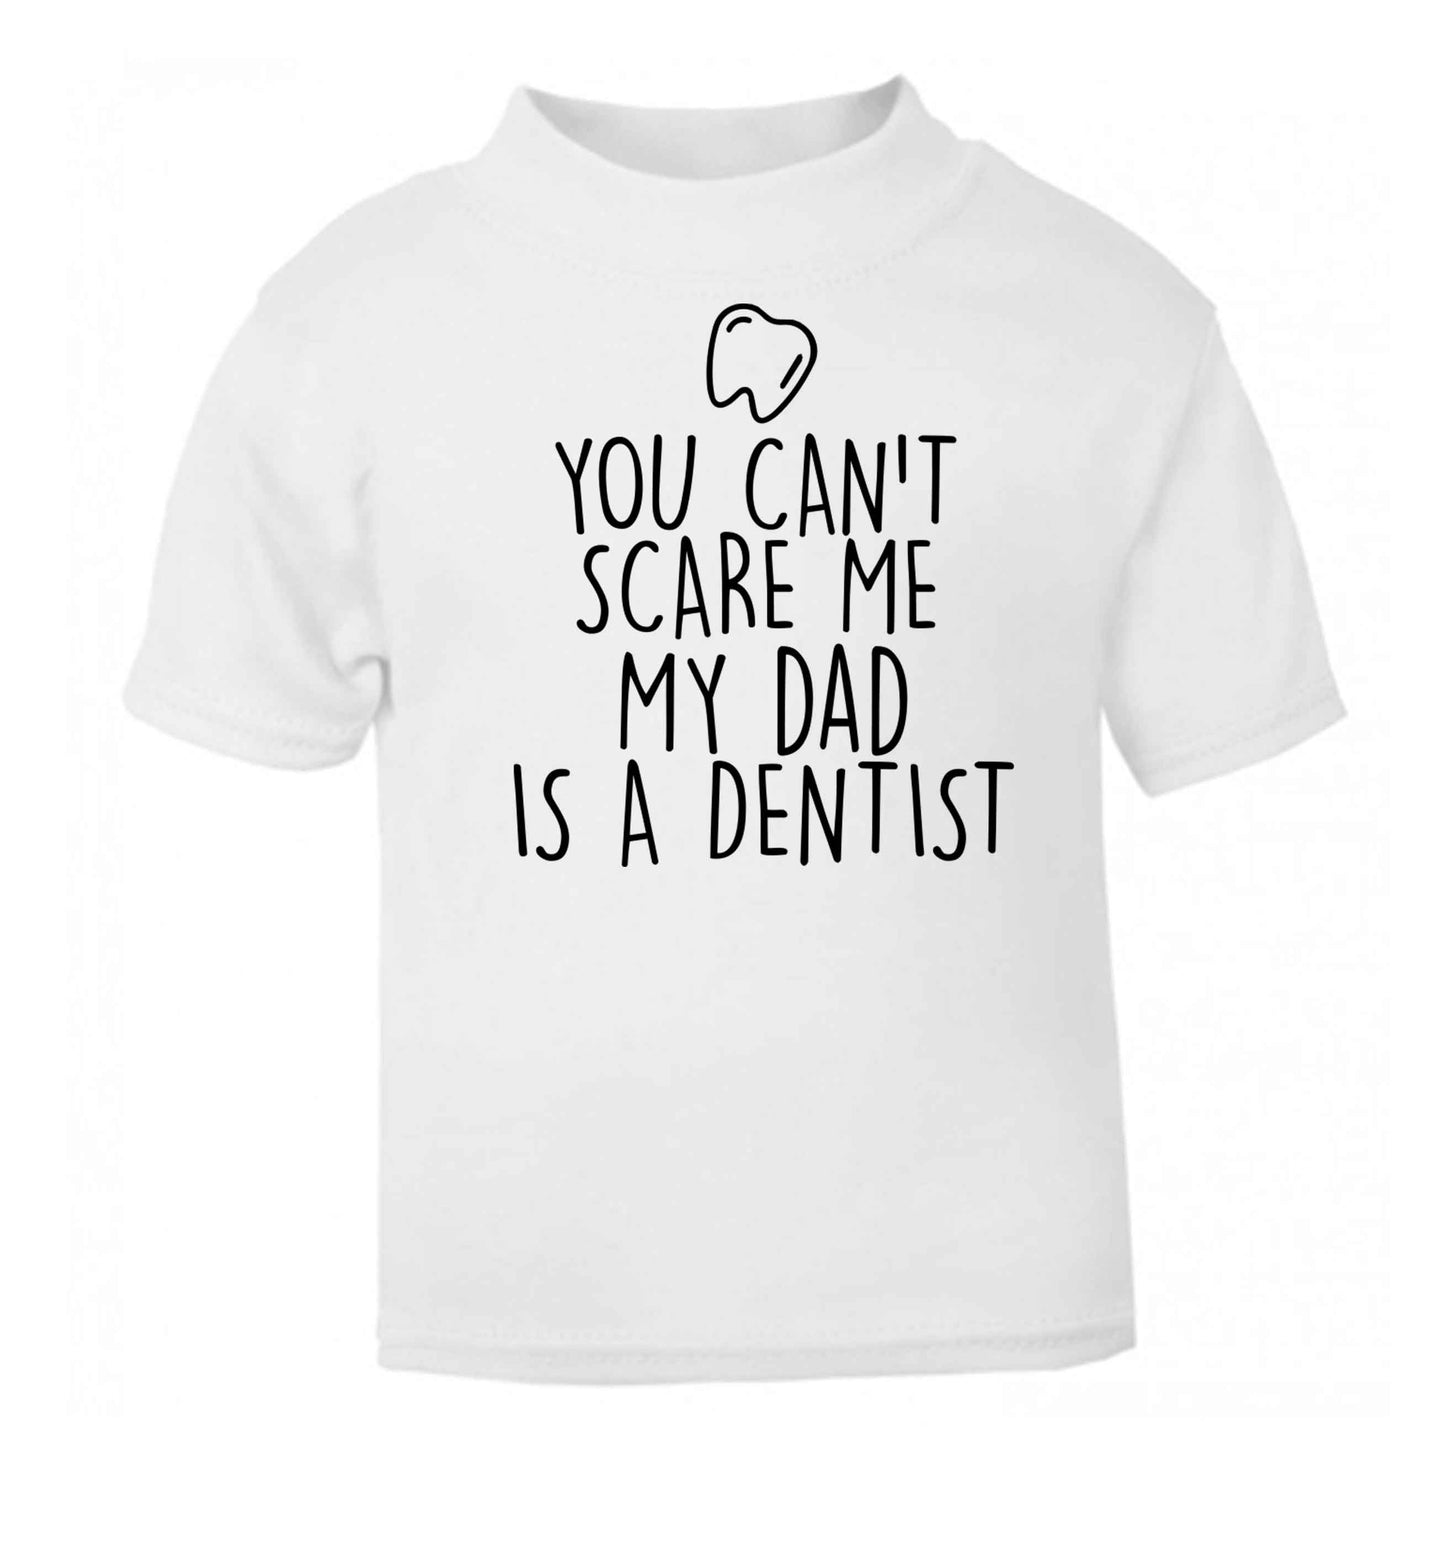 You can't scare me my dad is a dentist white baby toddler Tshirt 2 Years